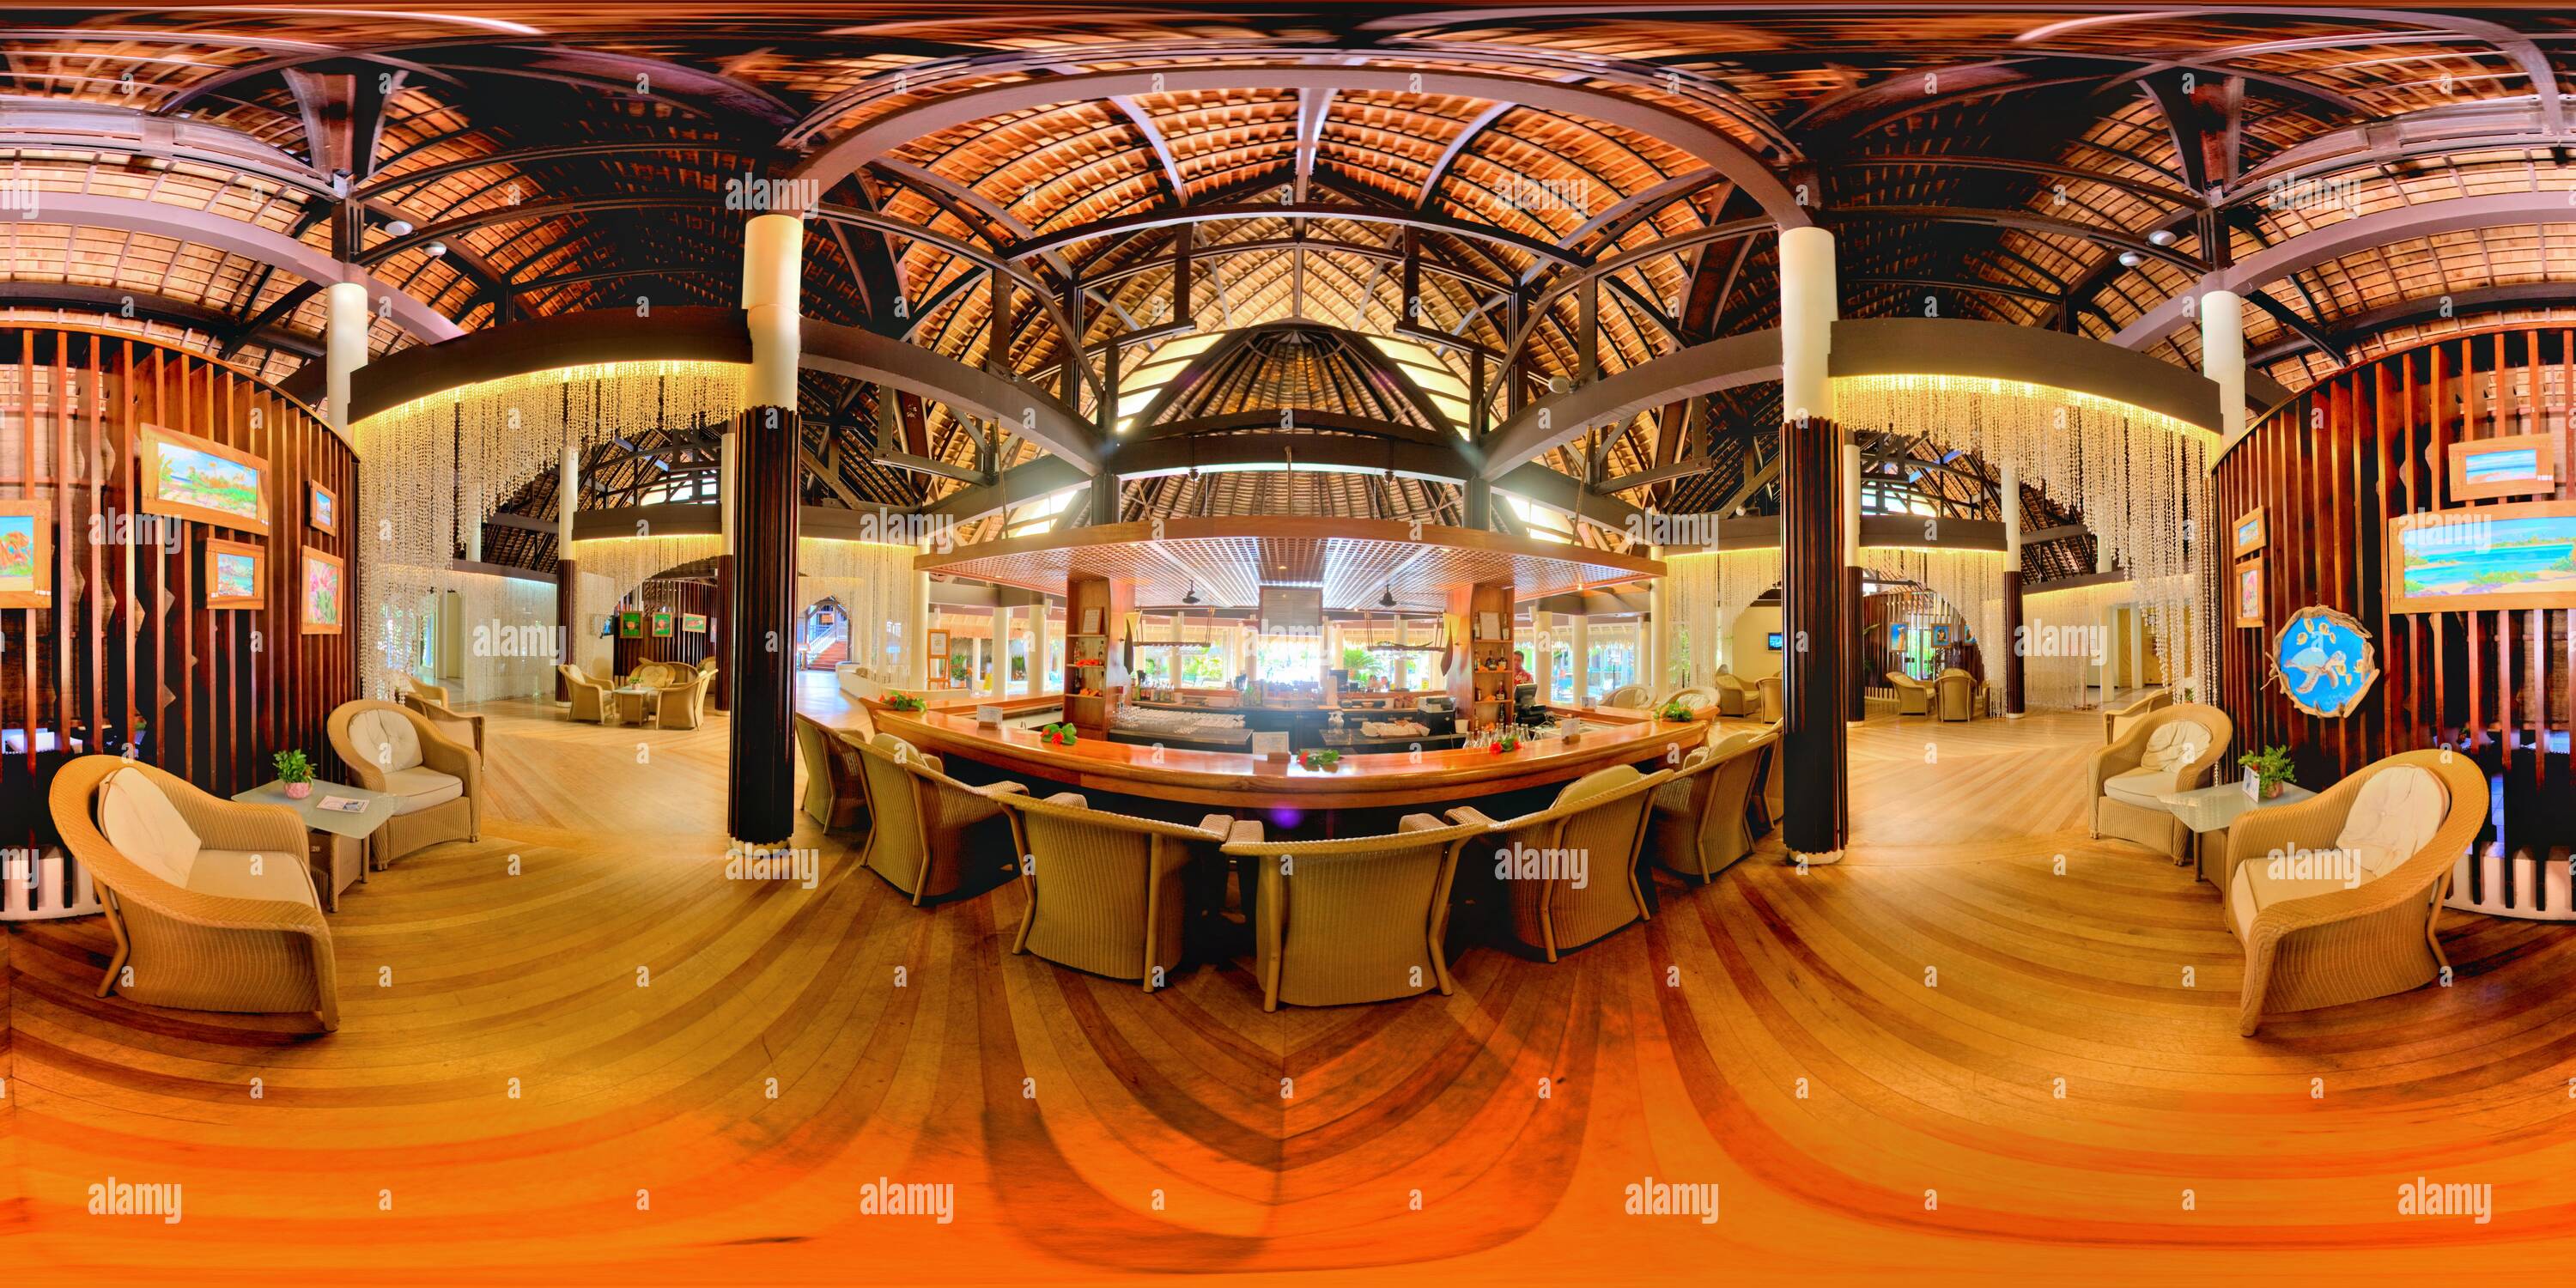 360° view of Bar Alamy